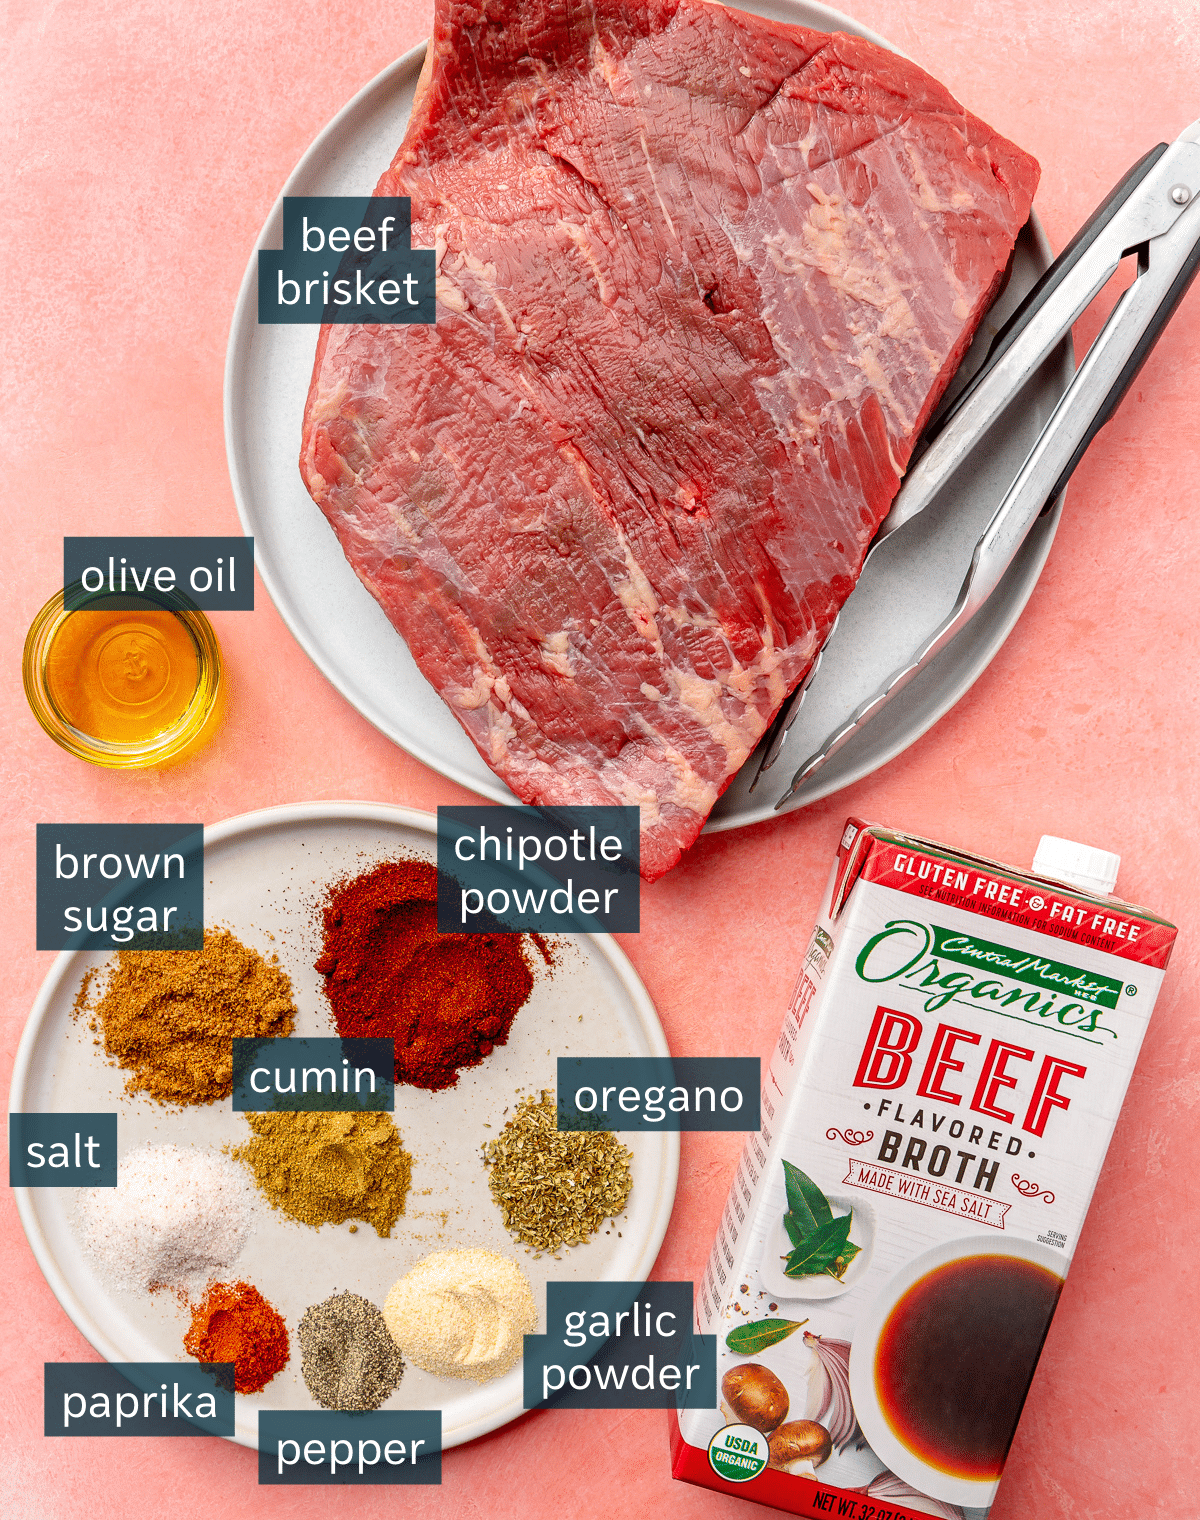 Ingredients for instant pot beef chicken are placed on a pink background.